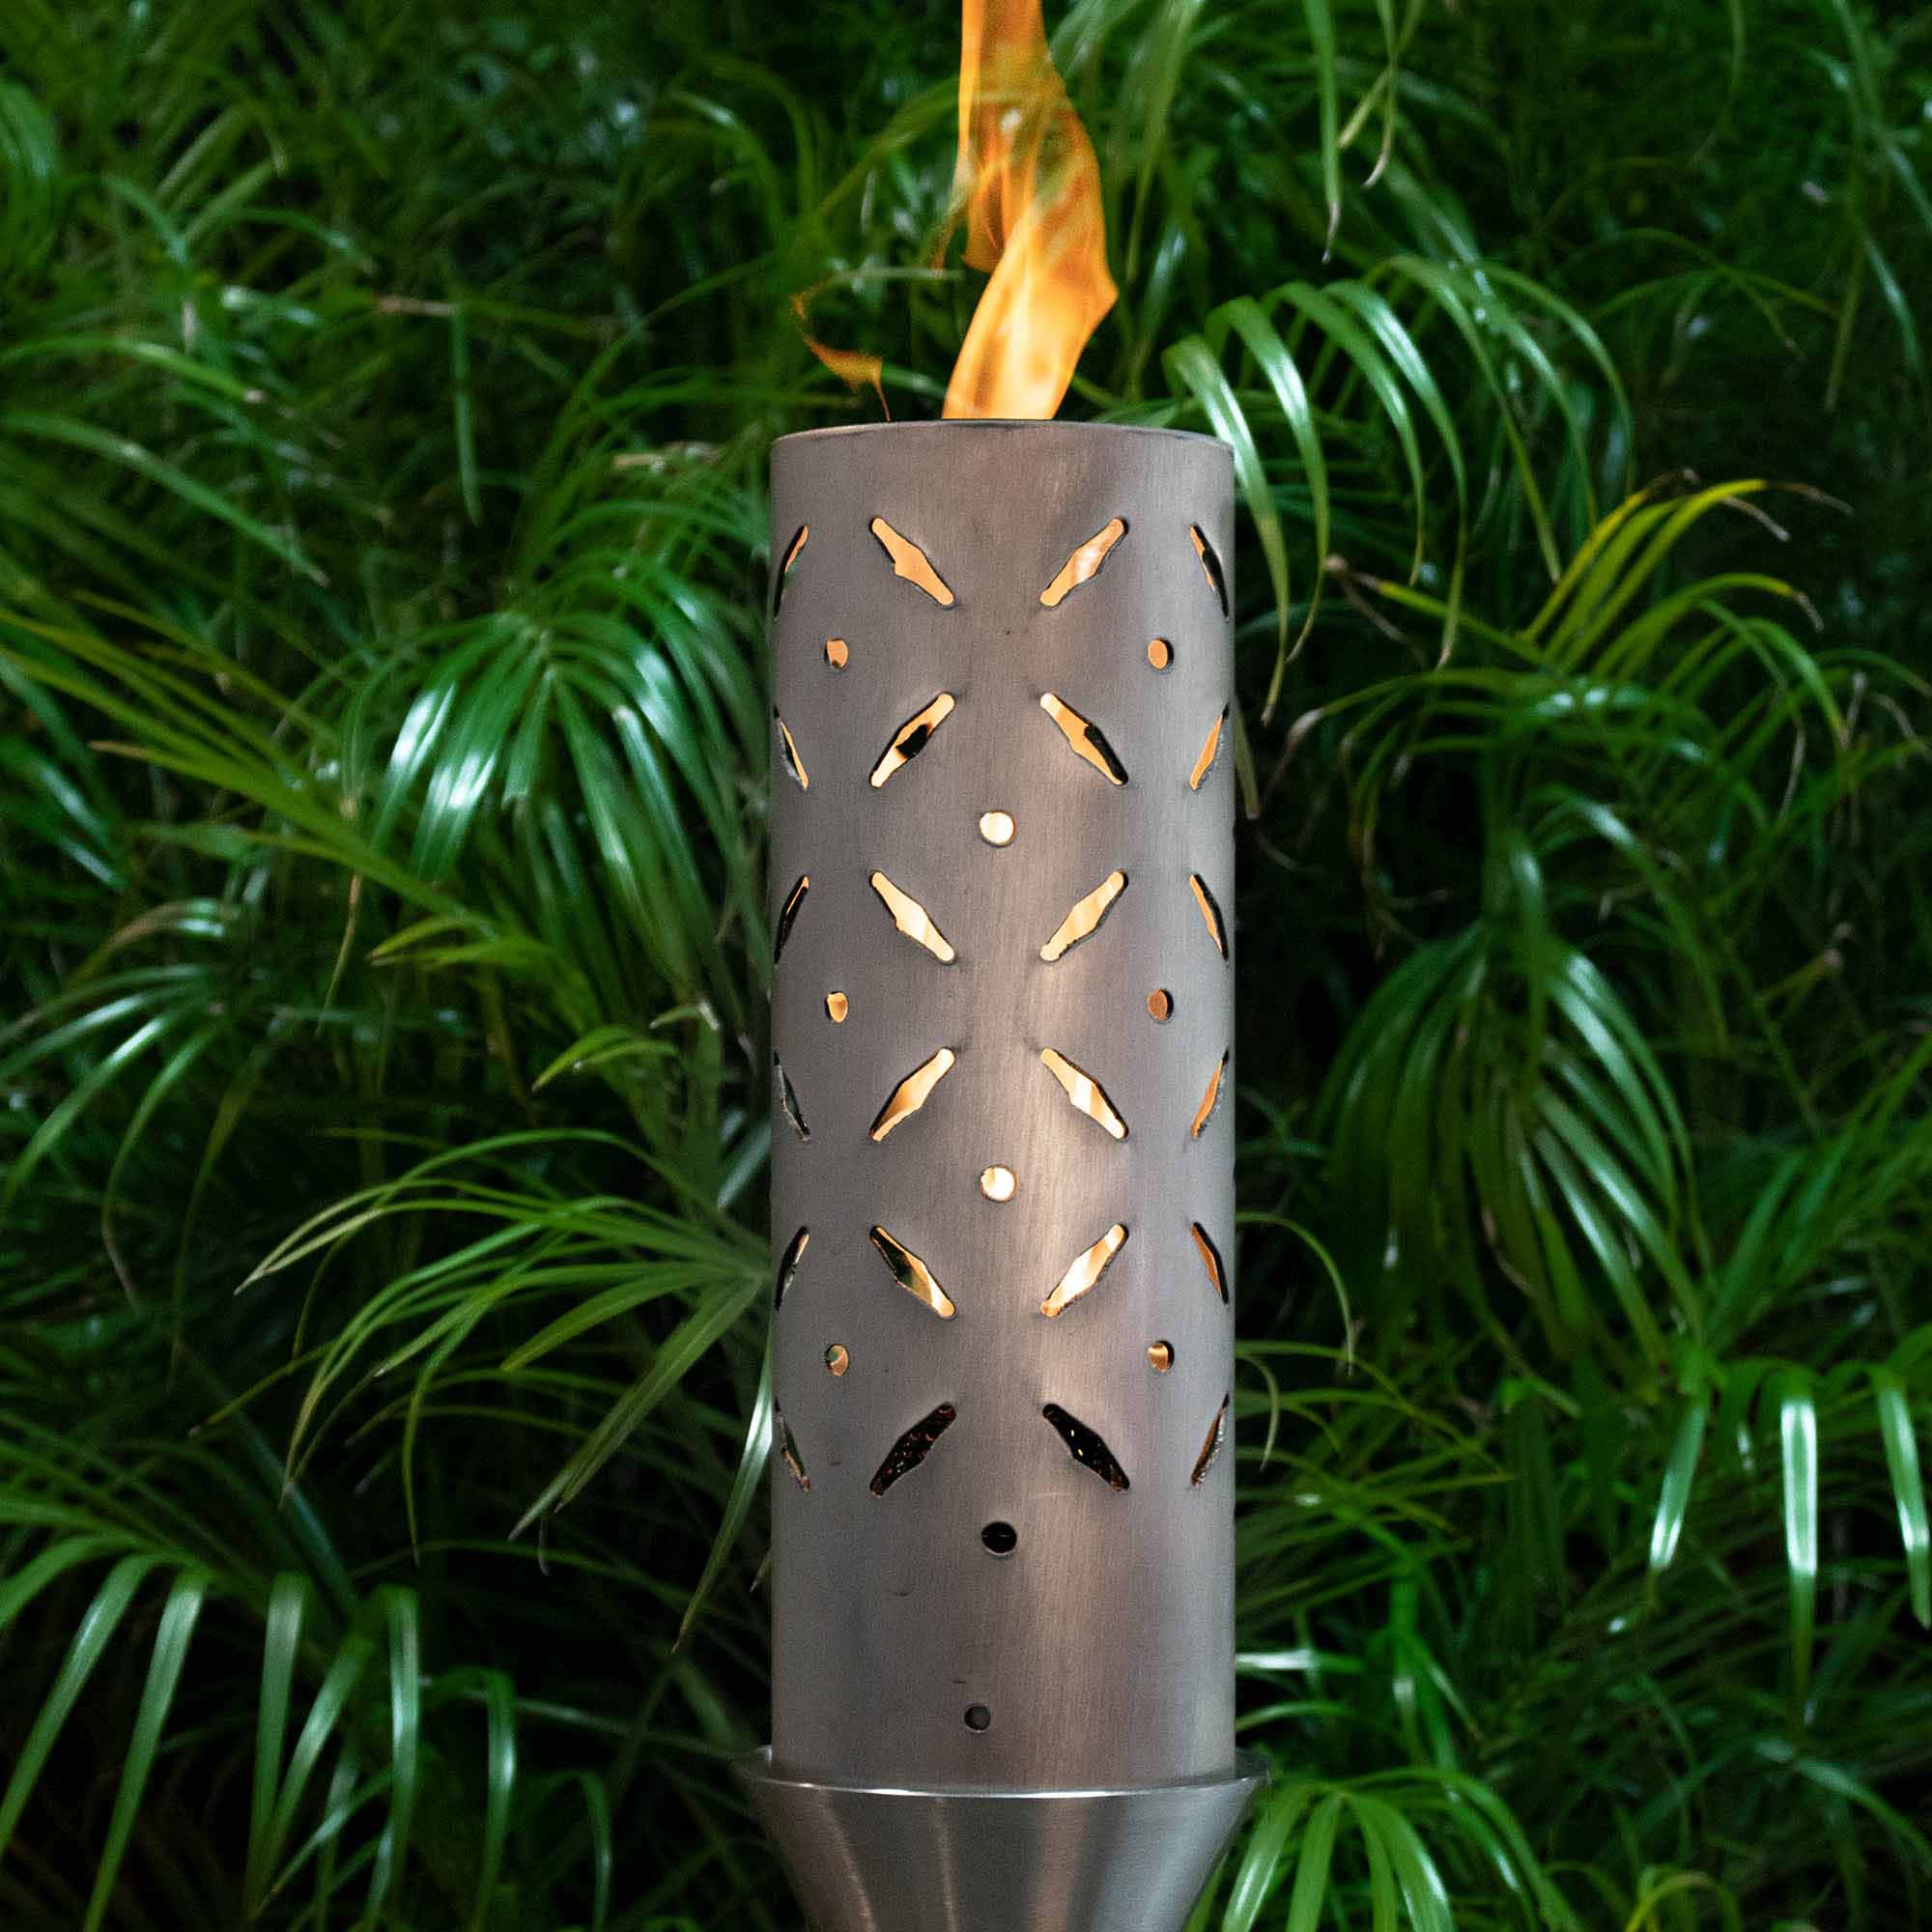 The Outdoor Plus Diamond Plate Fire Torch